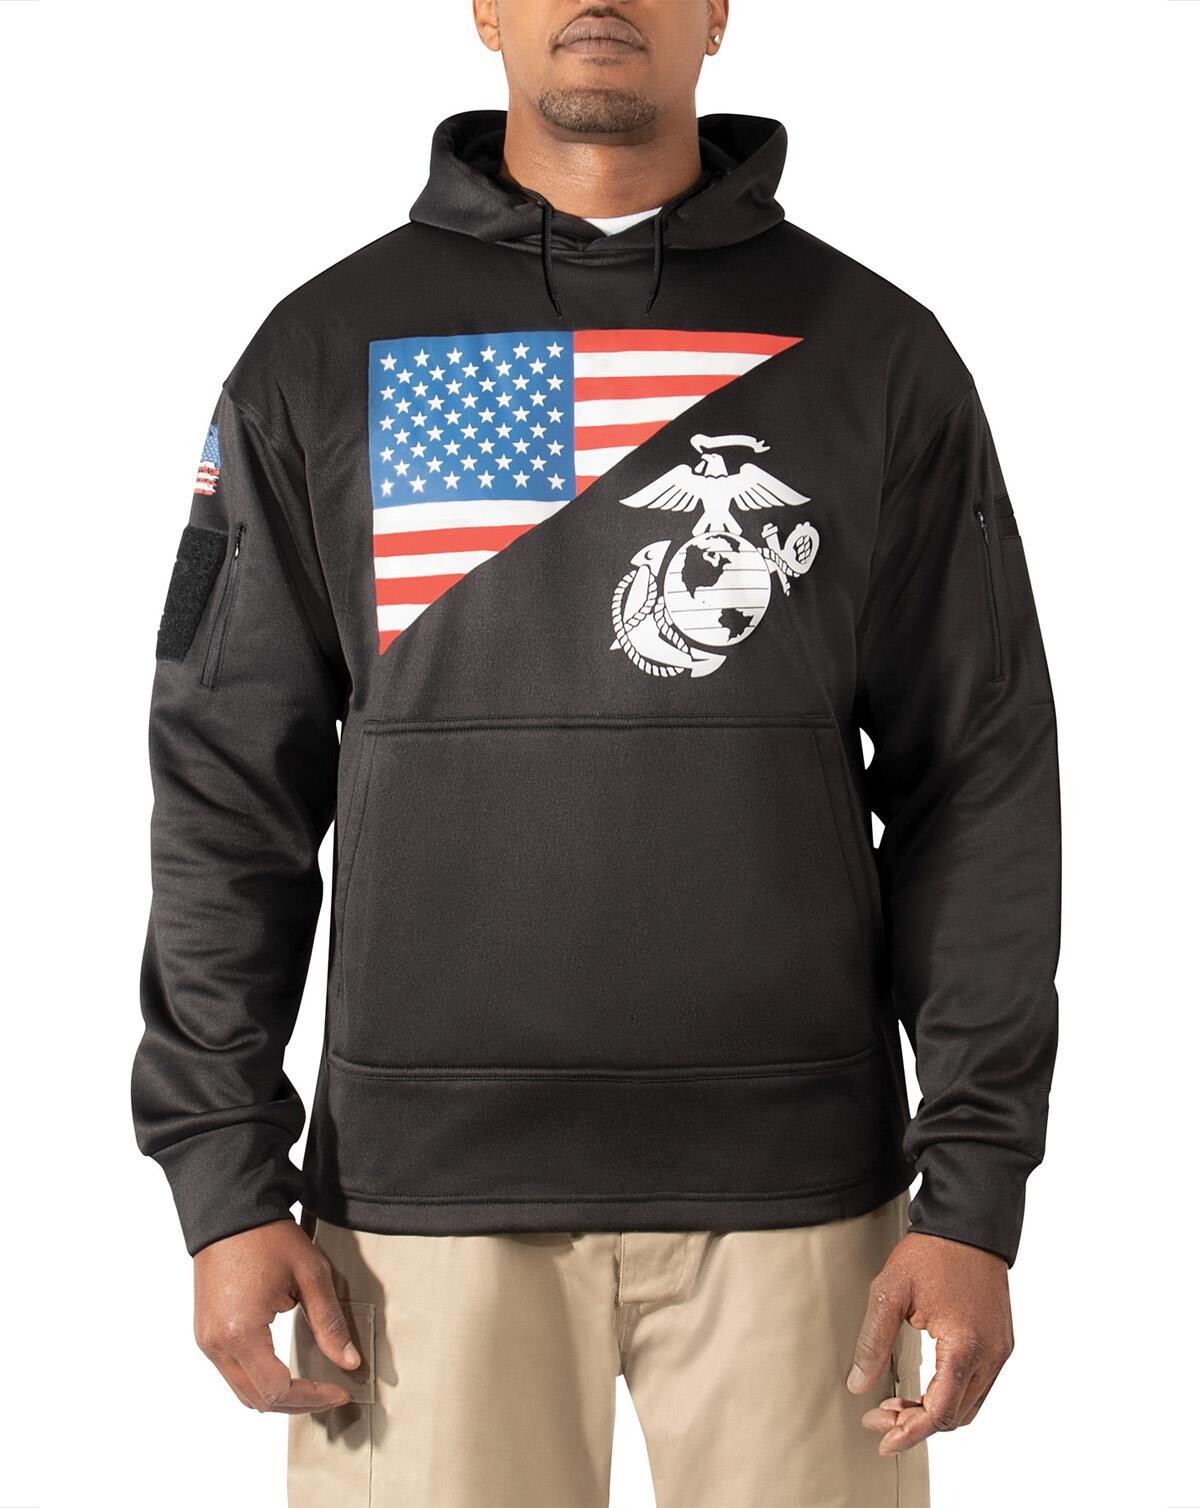 11: Rothco US Flag Concealed Carry Hoodie (Sort, 2XL)